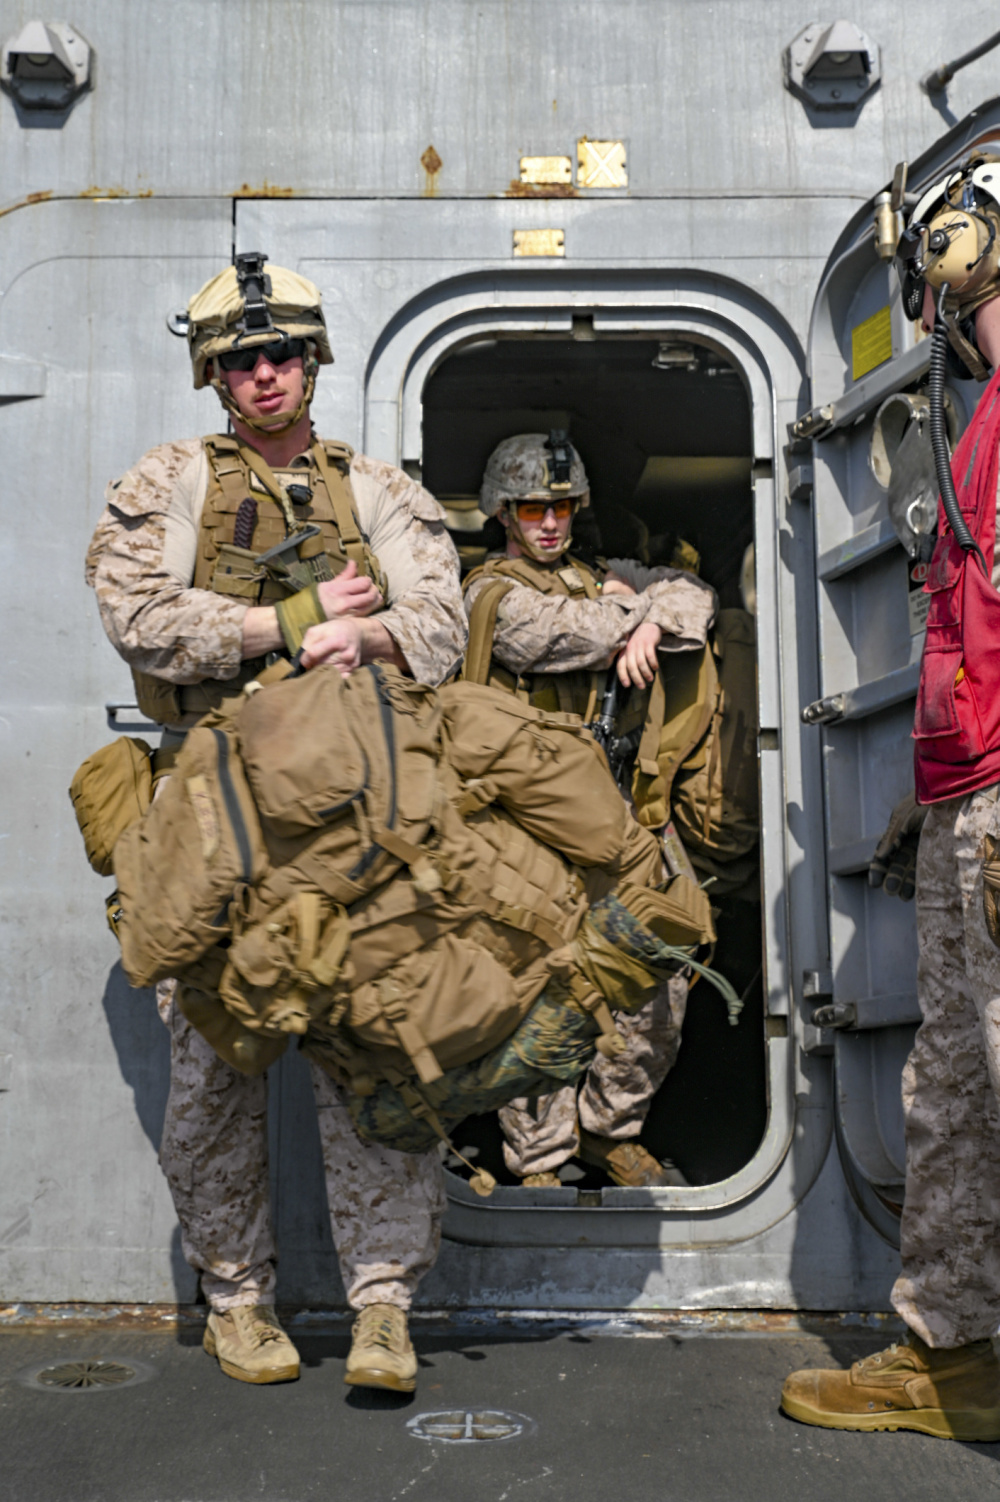 210125-M-ZN327-1018 ARABIAN GULF (Jan. 25, 2021) – U.S. Marines with Alpha Company, Battalion Landing Team 1/4, 15th Marine Expeditionary Unit, step onto the flight deck of the amphibious transport dock ship USS San Diego (LPD 22). San Diego, part of the Makin Island Amphibious Ready Group, and the 15th MEU are deployed to the U.S. 5th Fleet area of operations in support of naval operations to ensure maritime stability and security in the Central Region, connecting the Mediterranean and the Pacific through the western Indian Ocean and three strategic choke points. (U.S. Marine Corps photo by Cpl. Britany Rowlett)